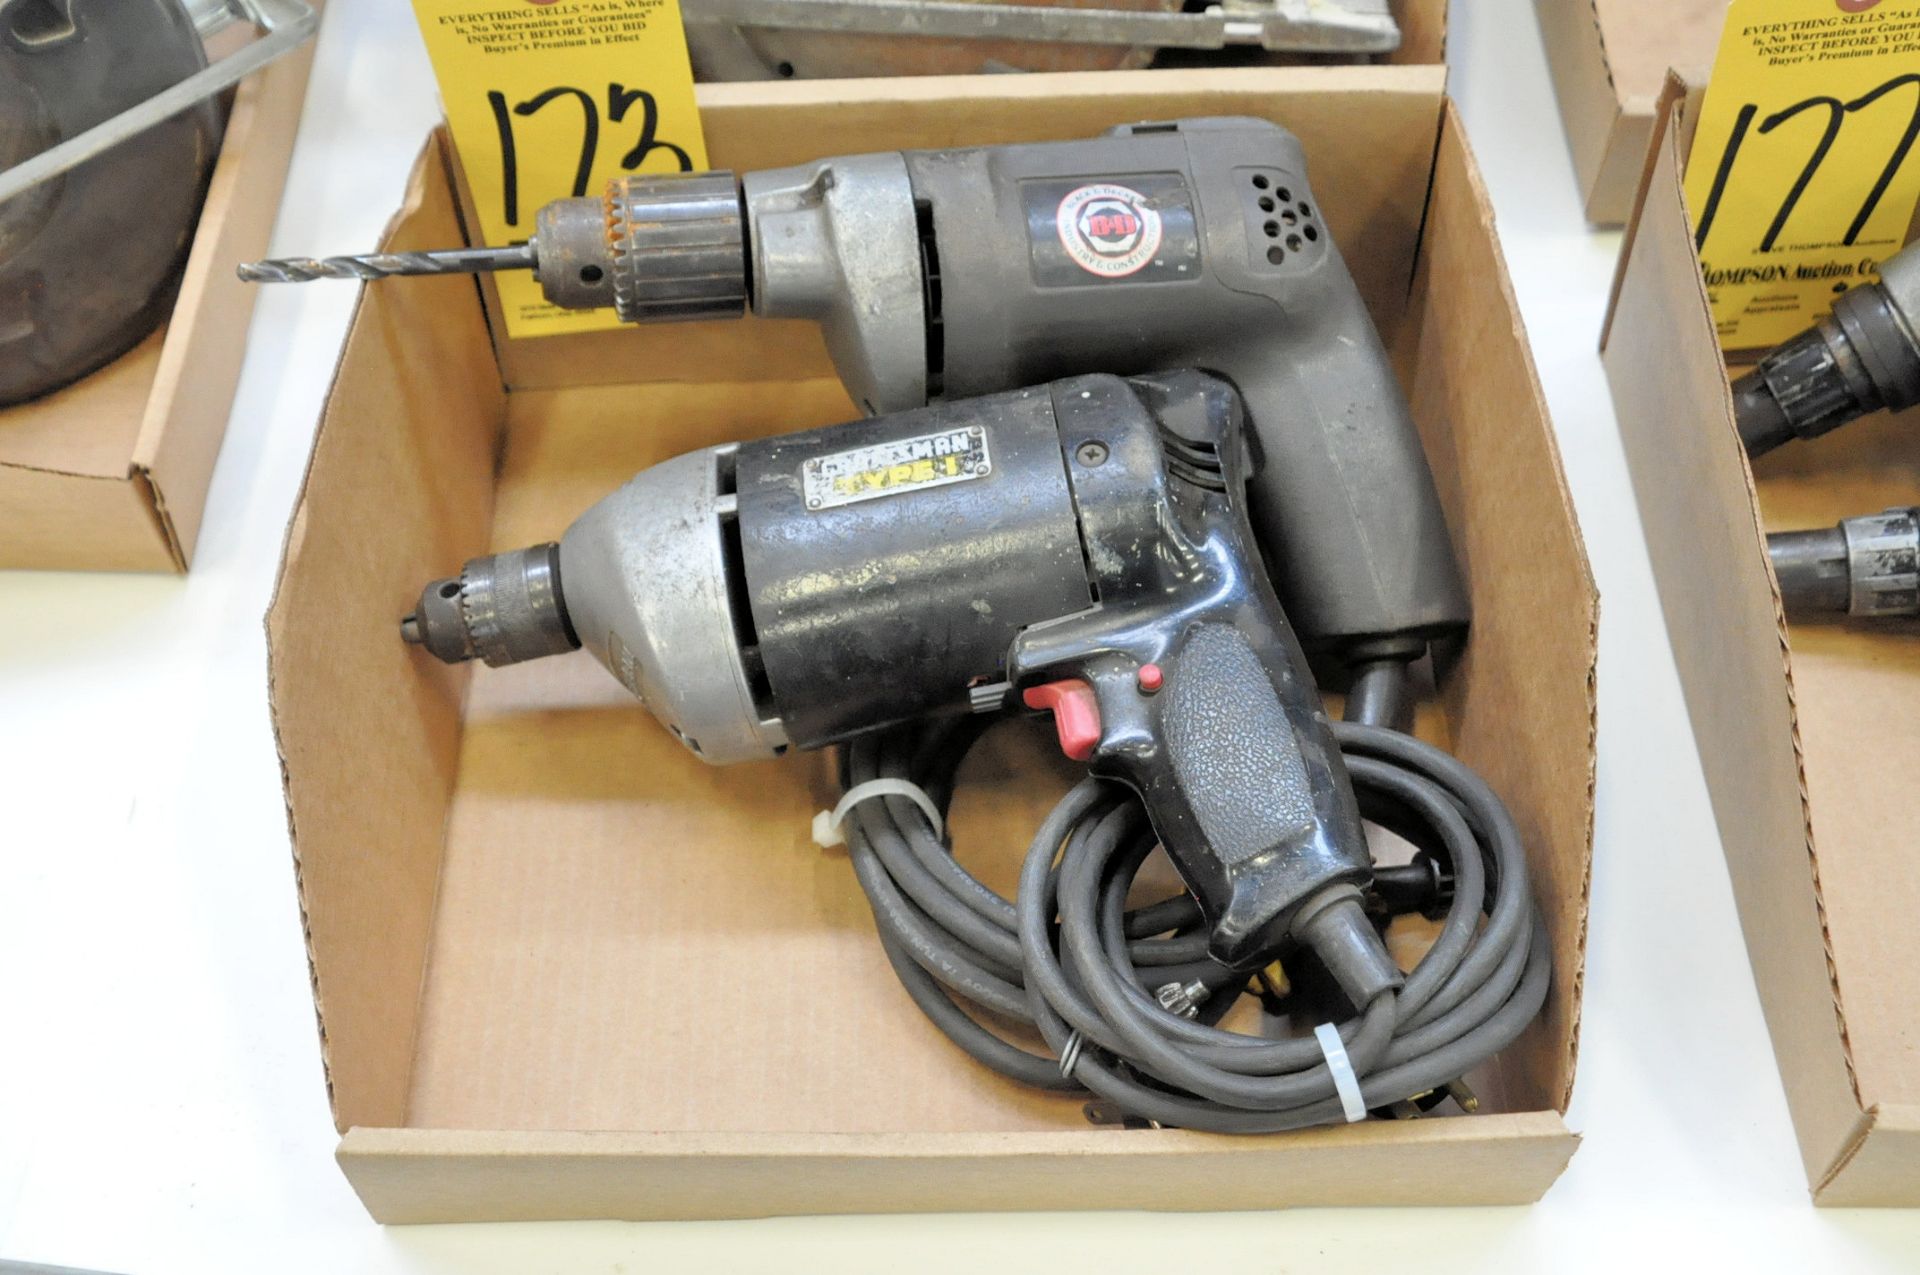 Lot-(1) Craftsman 3/8" Electric Drill and (1) Black & Decker 1/2" Electric Drill in (1) Box